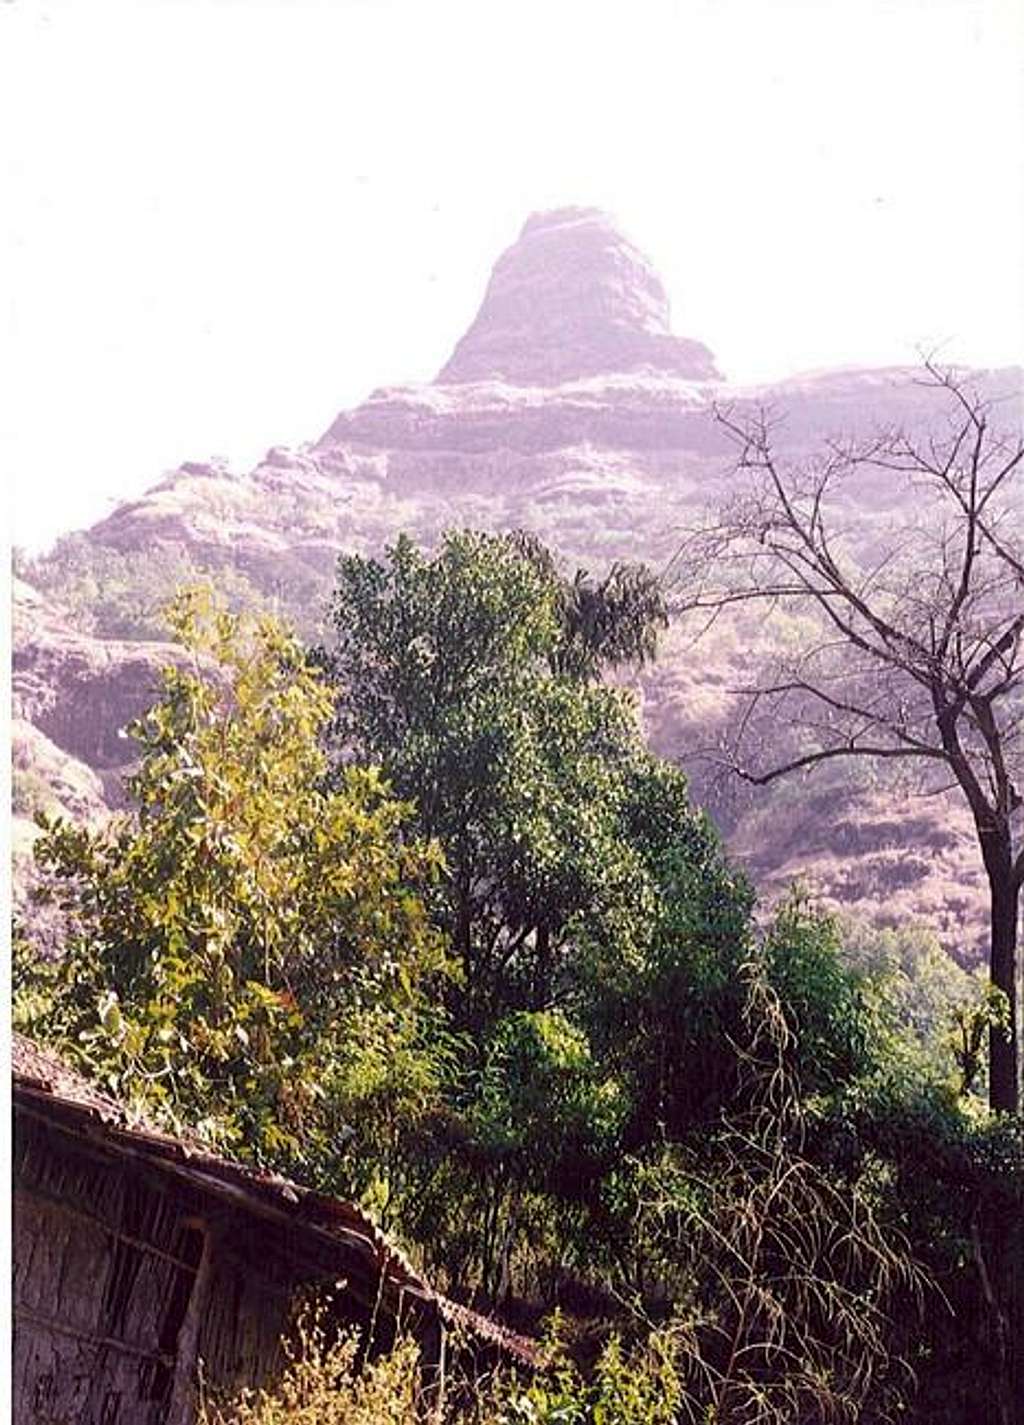 Durg Lingana, as seen from...